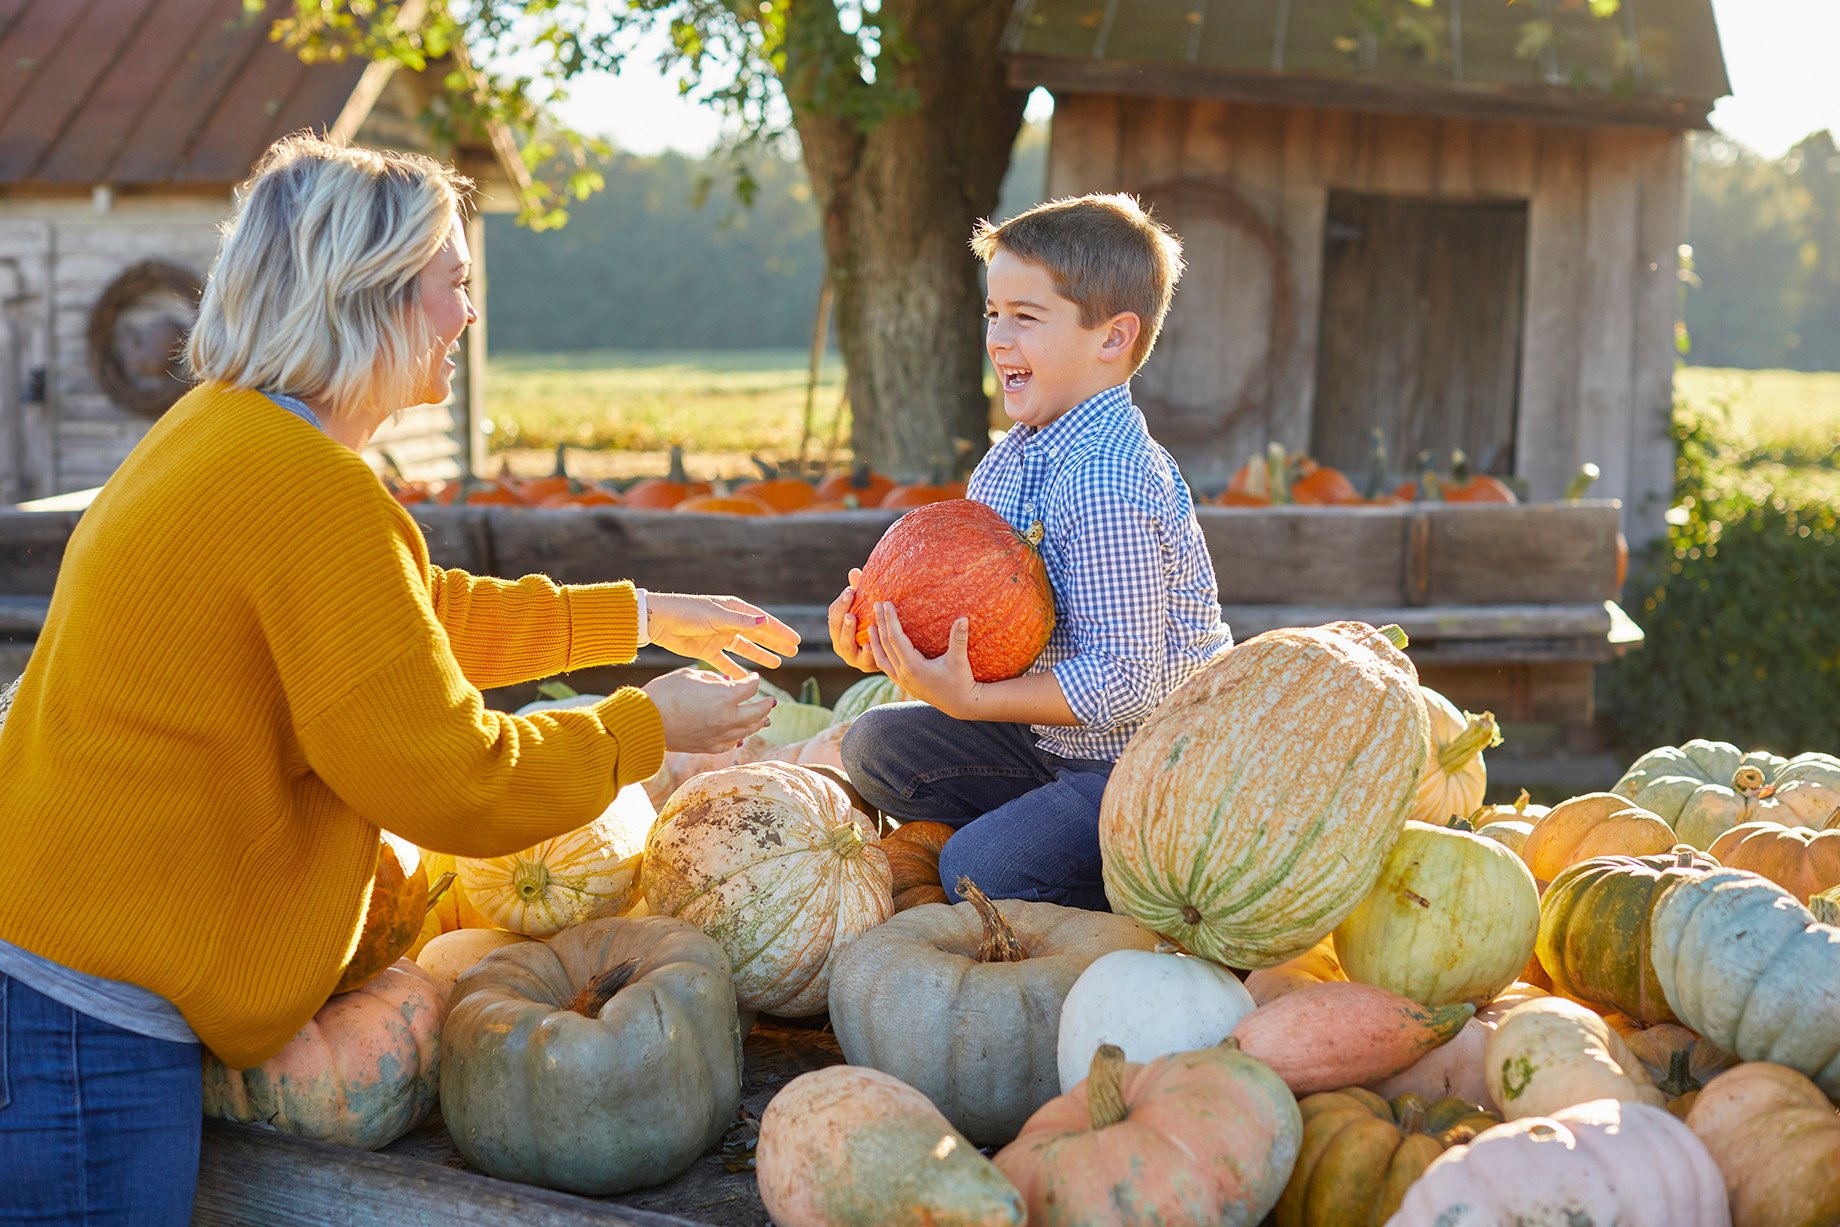 Young boy finds perfect pumpkin at Parrish Pumpkin patch in Lunenburg county, Virginia shot by Tyler Darden for Virginia Living magazine.